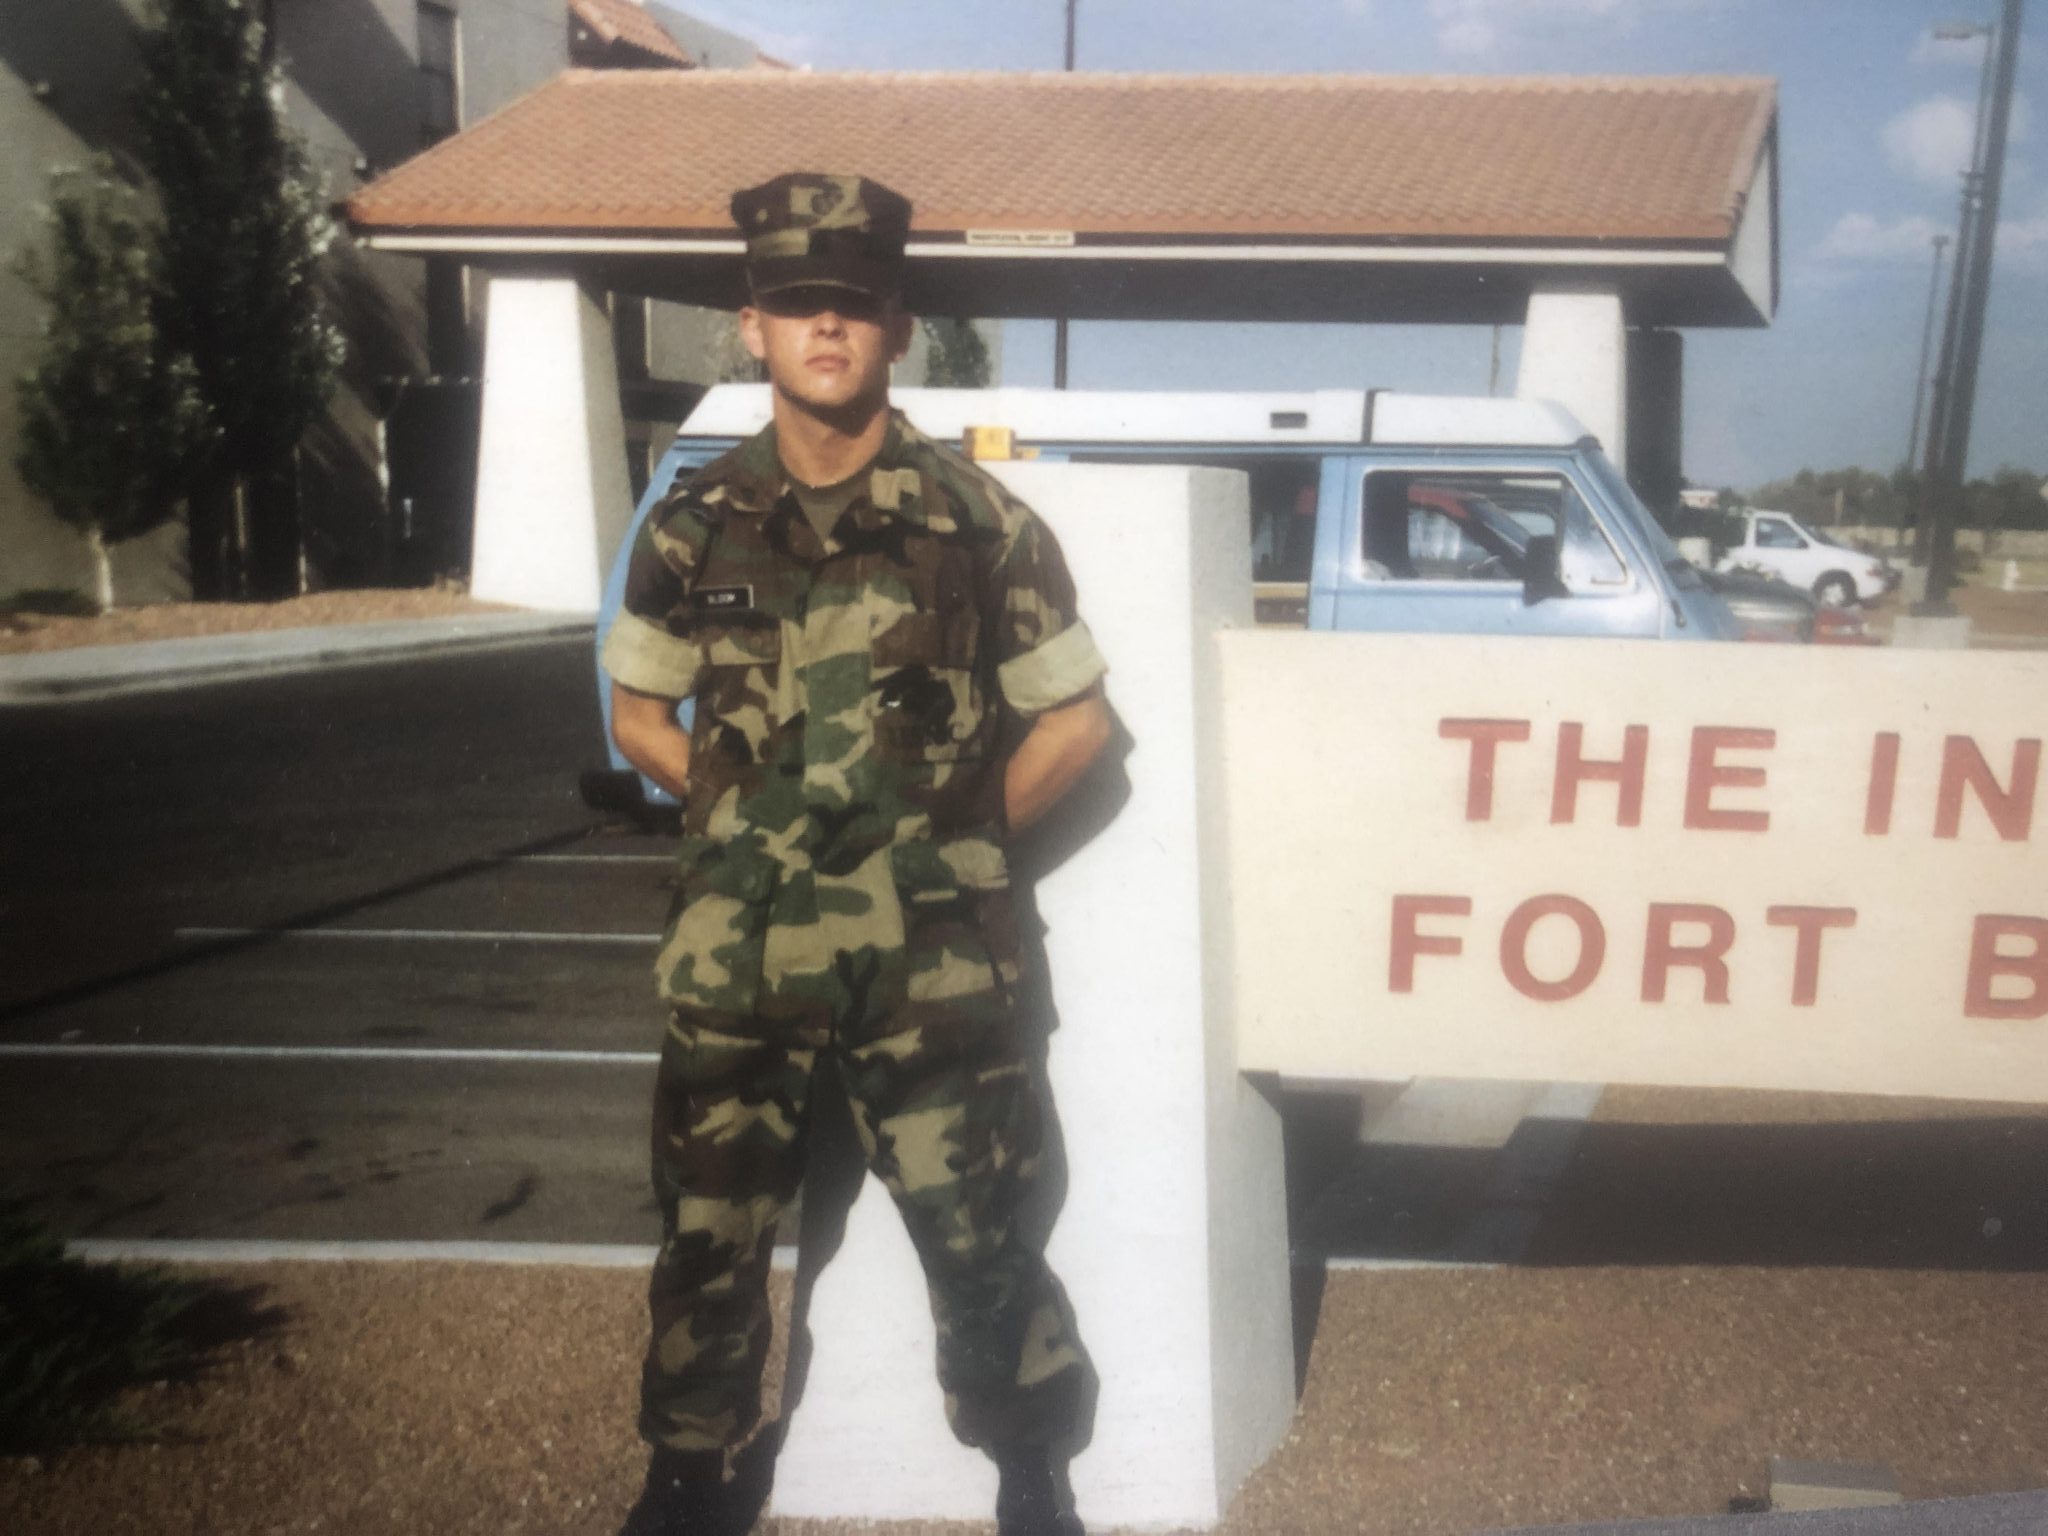 I was in Marine Corps boot camp in 1990 when Iraq invaded Kuwait